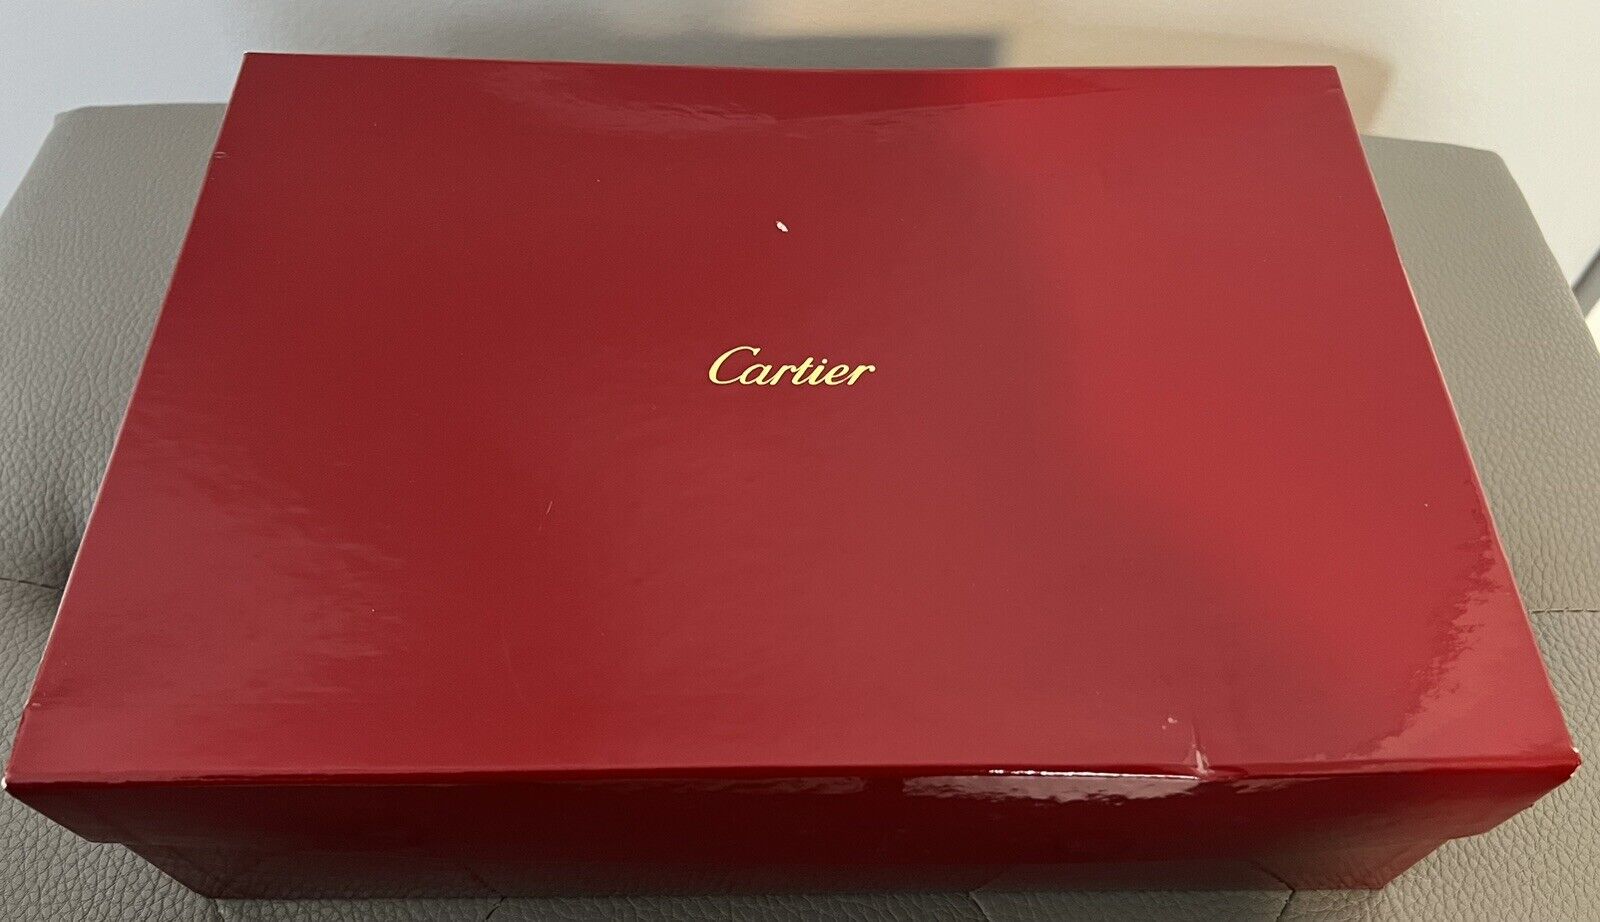 Cartier Stationery Box W/Enveloppes And Cards (6+)